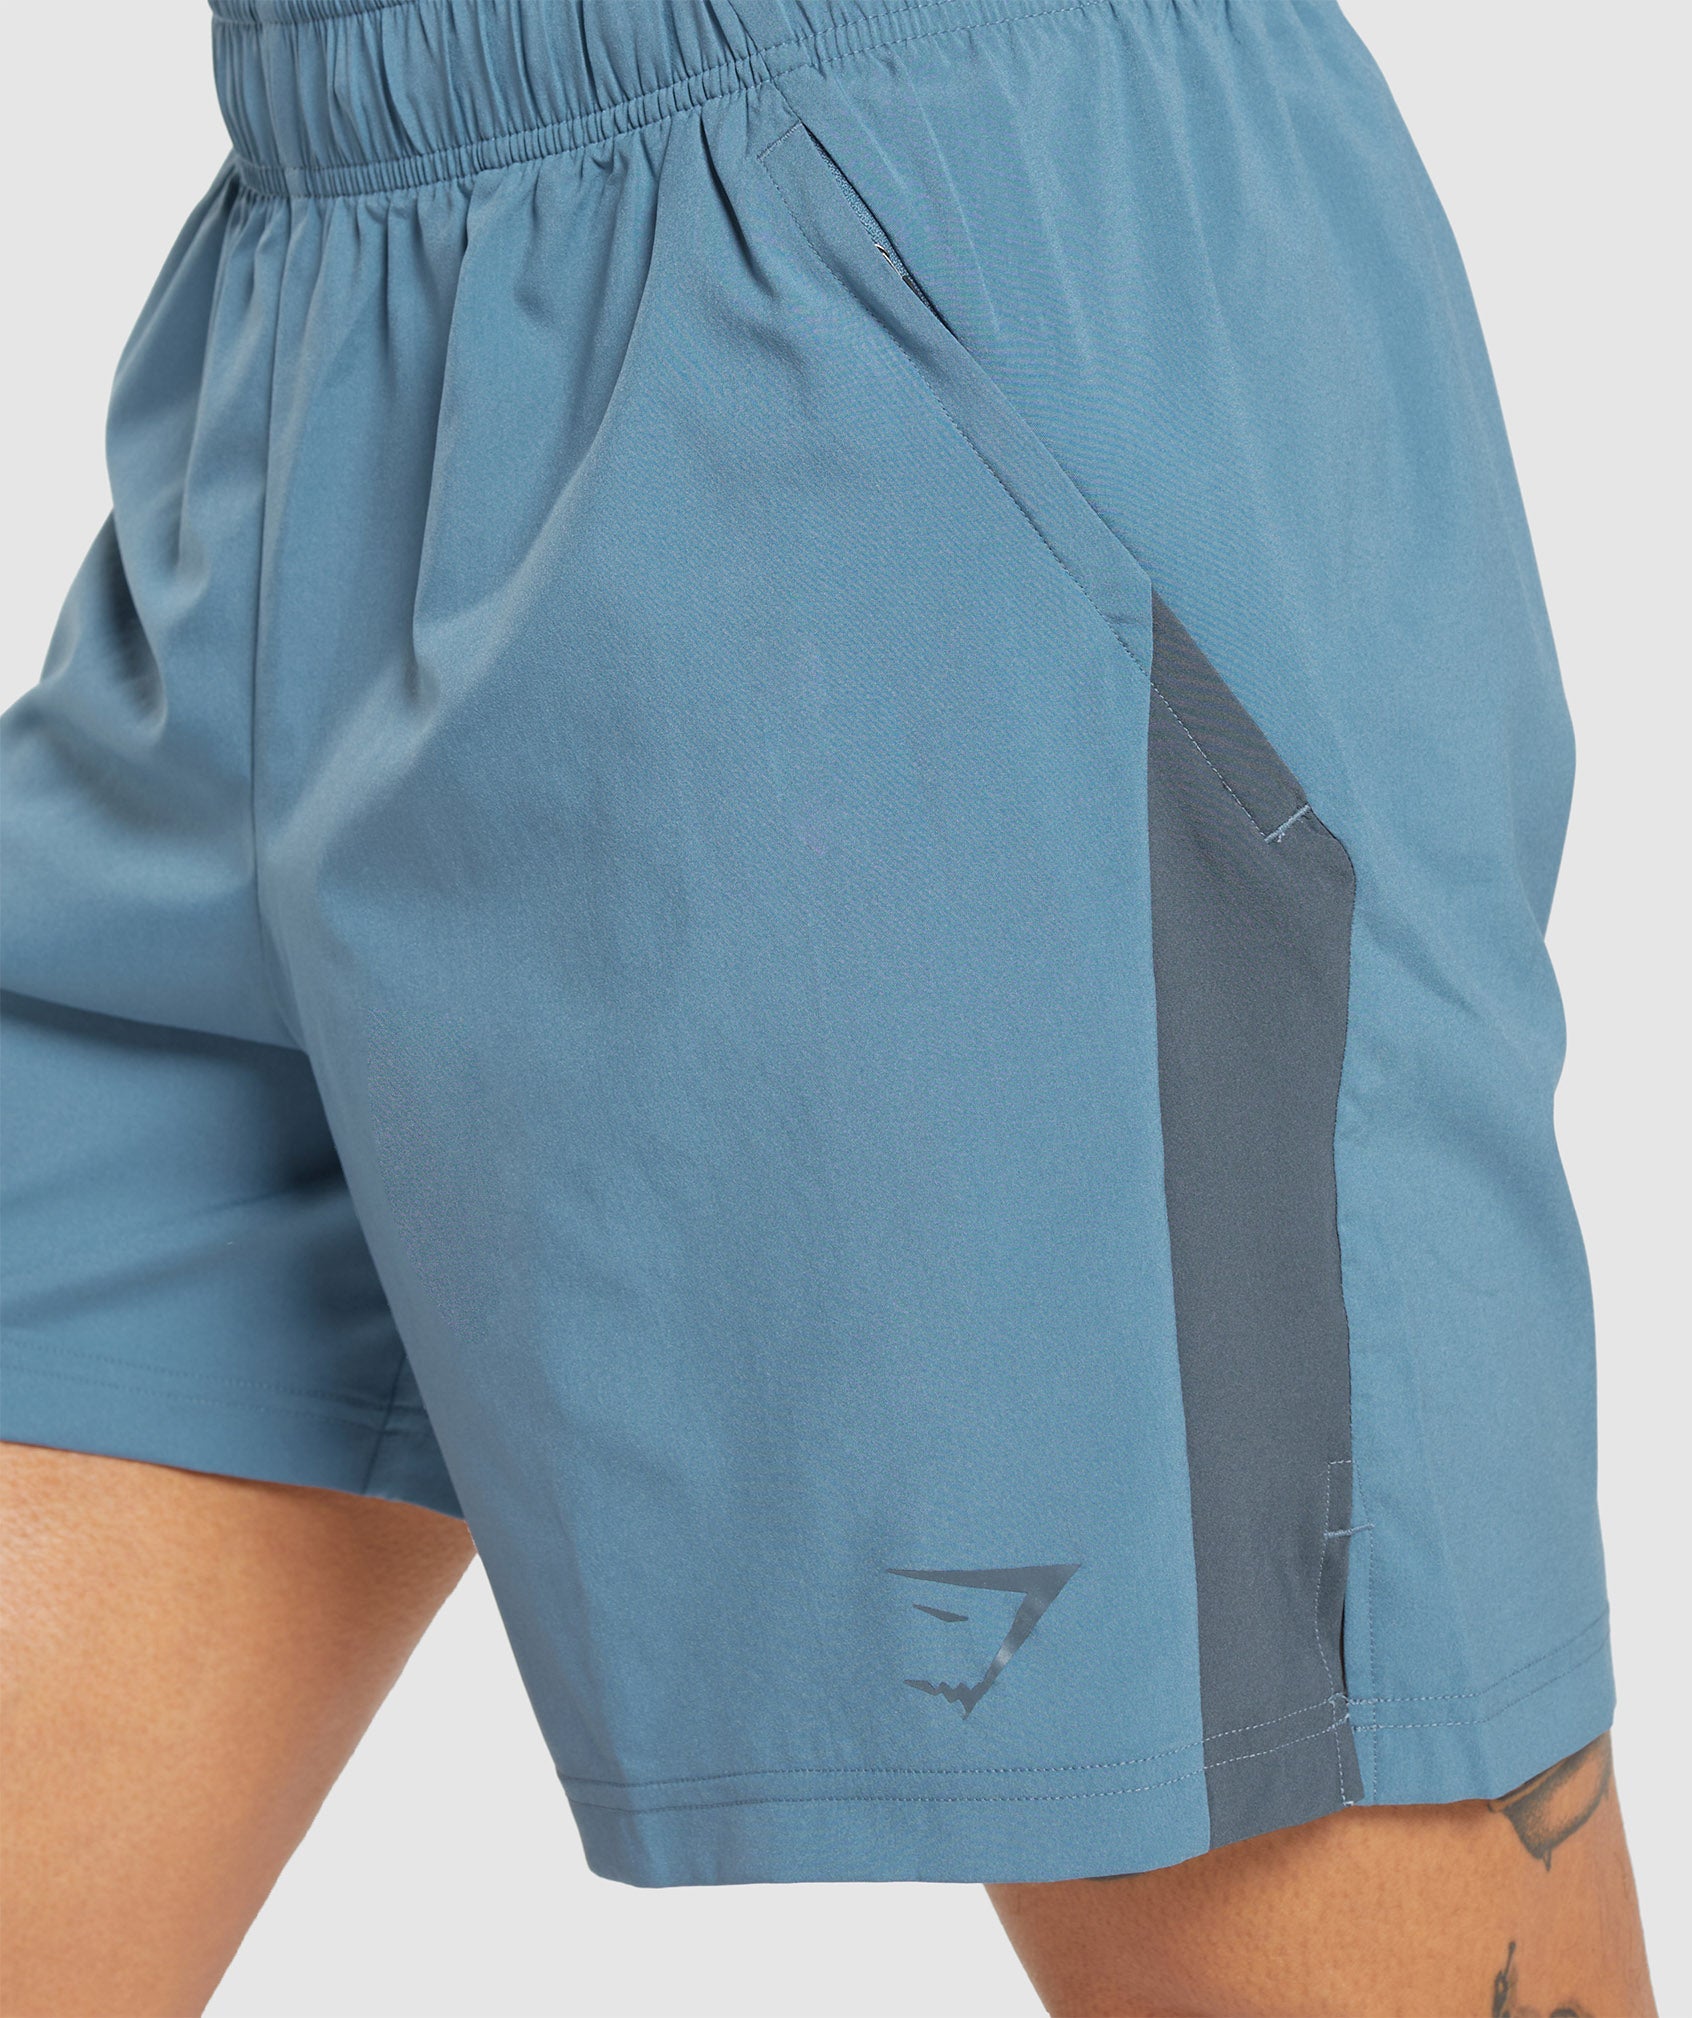 Sport 7" Shorts in Faded Blue/Titanium Blue - view 5